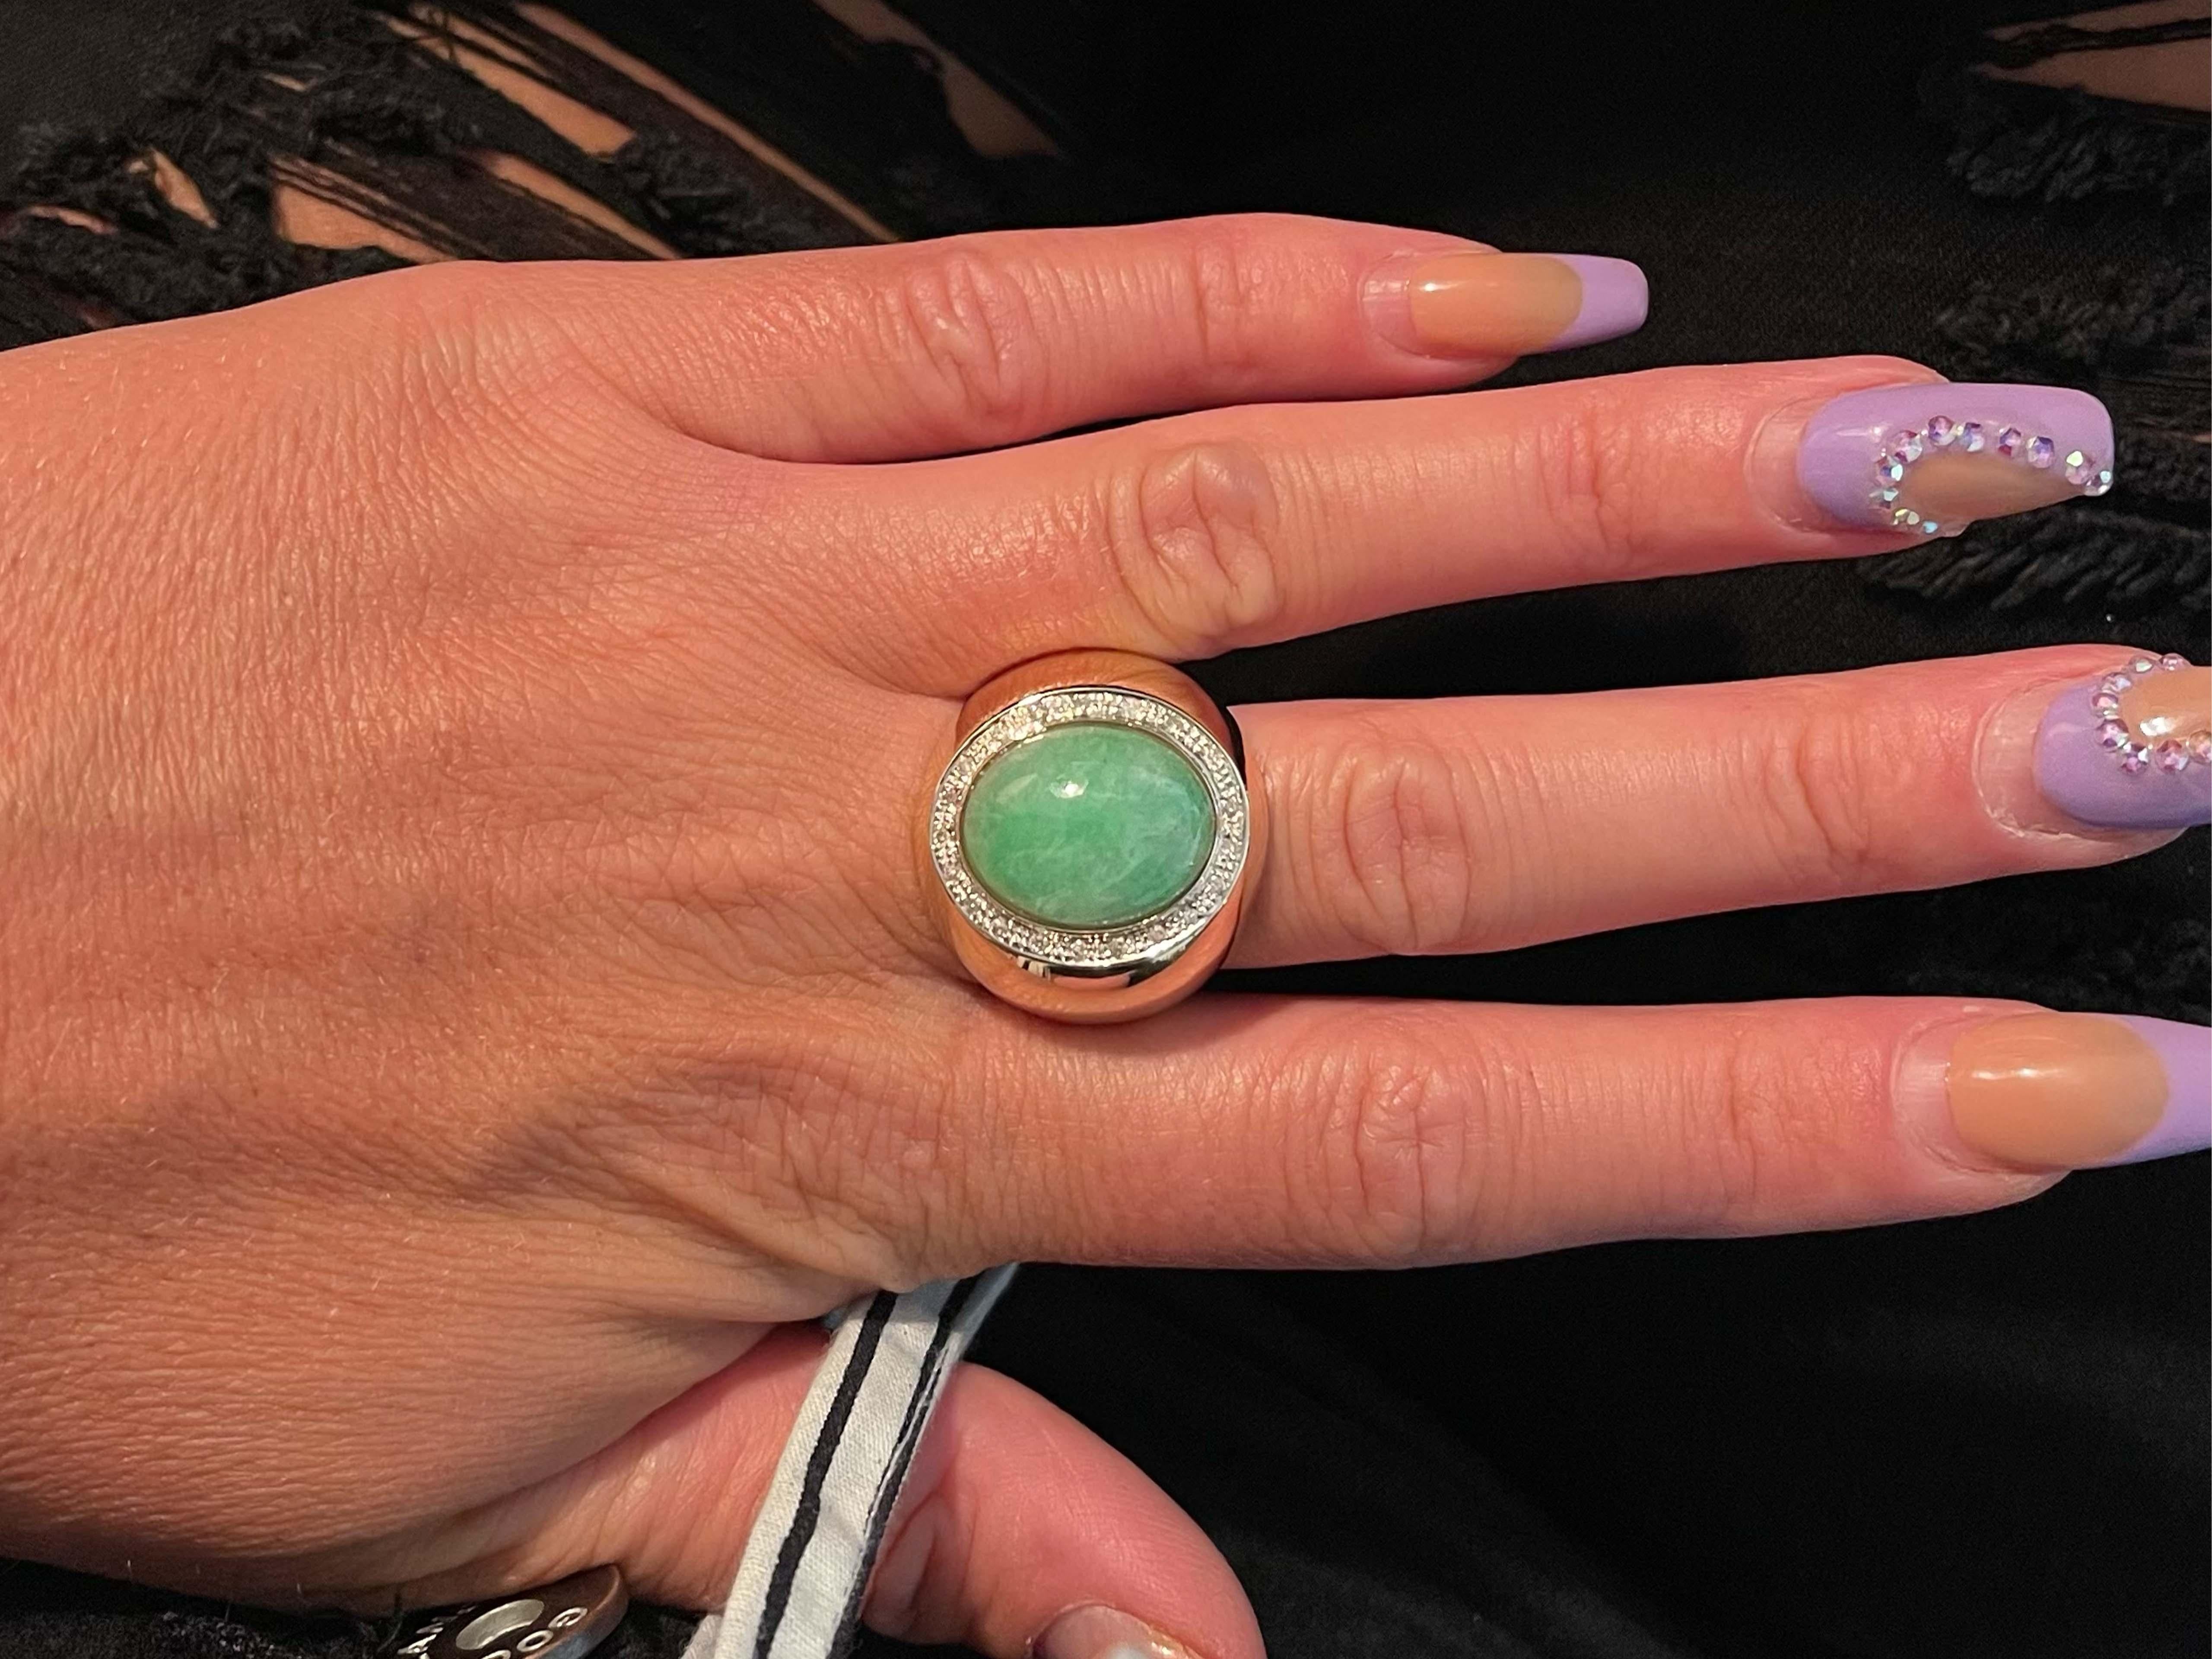 Men's Oval Light Green Jade and Diamond Halo Ring - 14k Yellow Gold. This stunning jade has a one-of-a-kind color. The Jade measures approximately 17.06 mm x 13.39 mm x 6.20 mm. The ring has a diamond halo of 20 diamonds. The diamonds total ~0.10